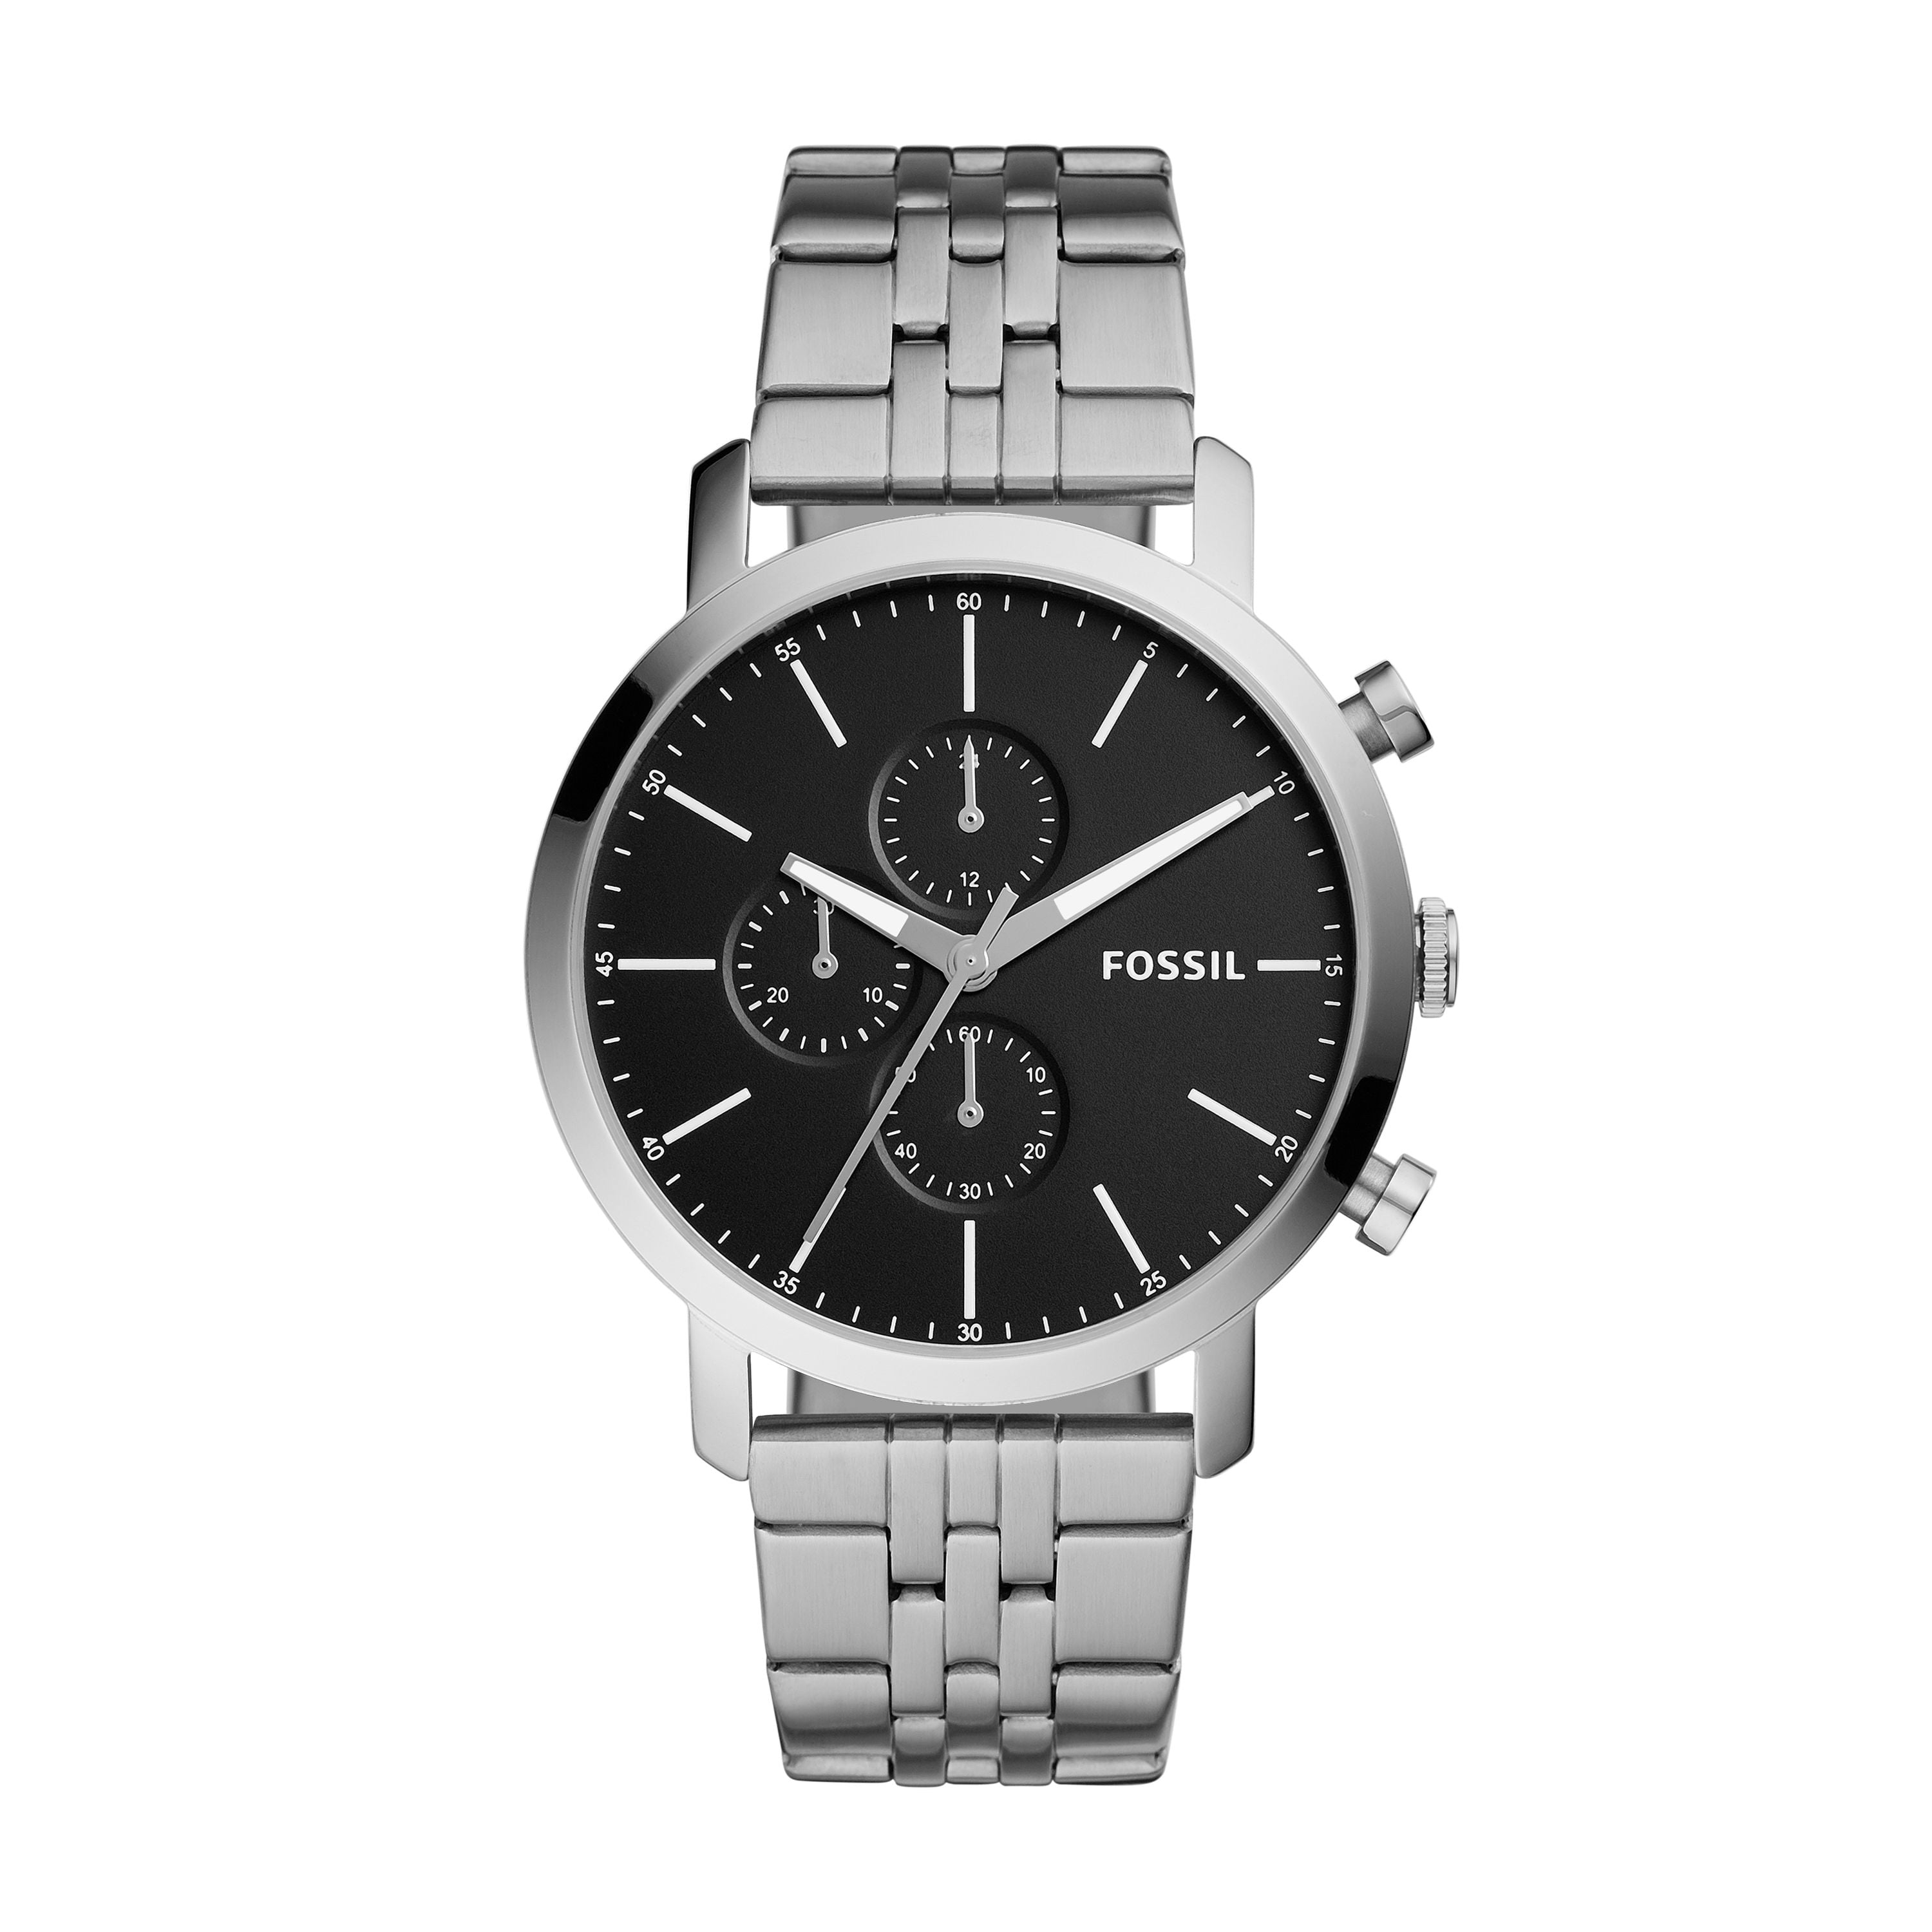 Fossil - Fossil Men's Luther Silver Tone Stainless Steel Chronograph All Stainless Steel Fossil Watch